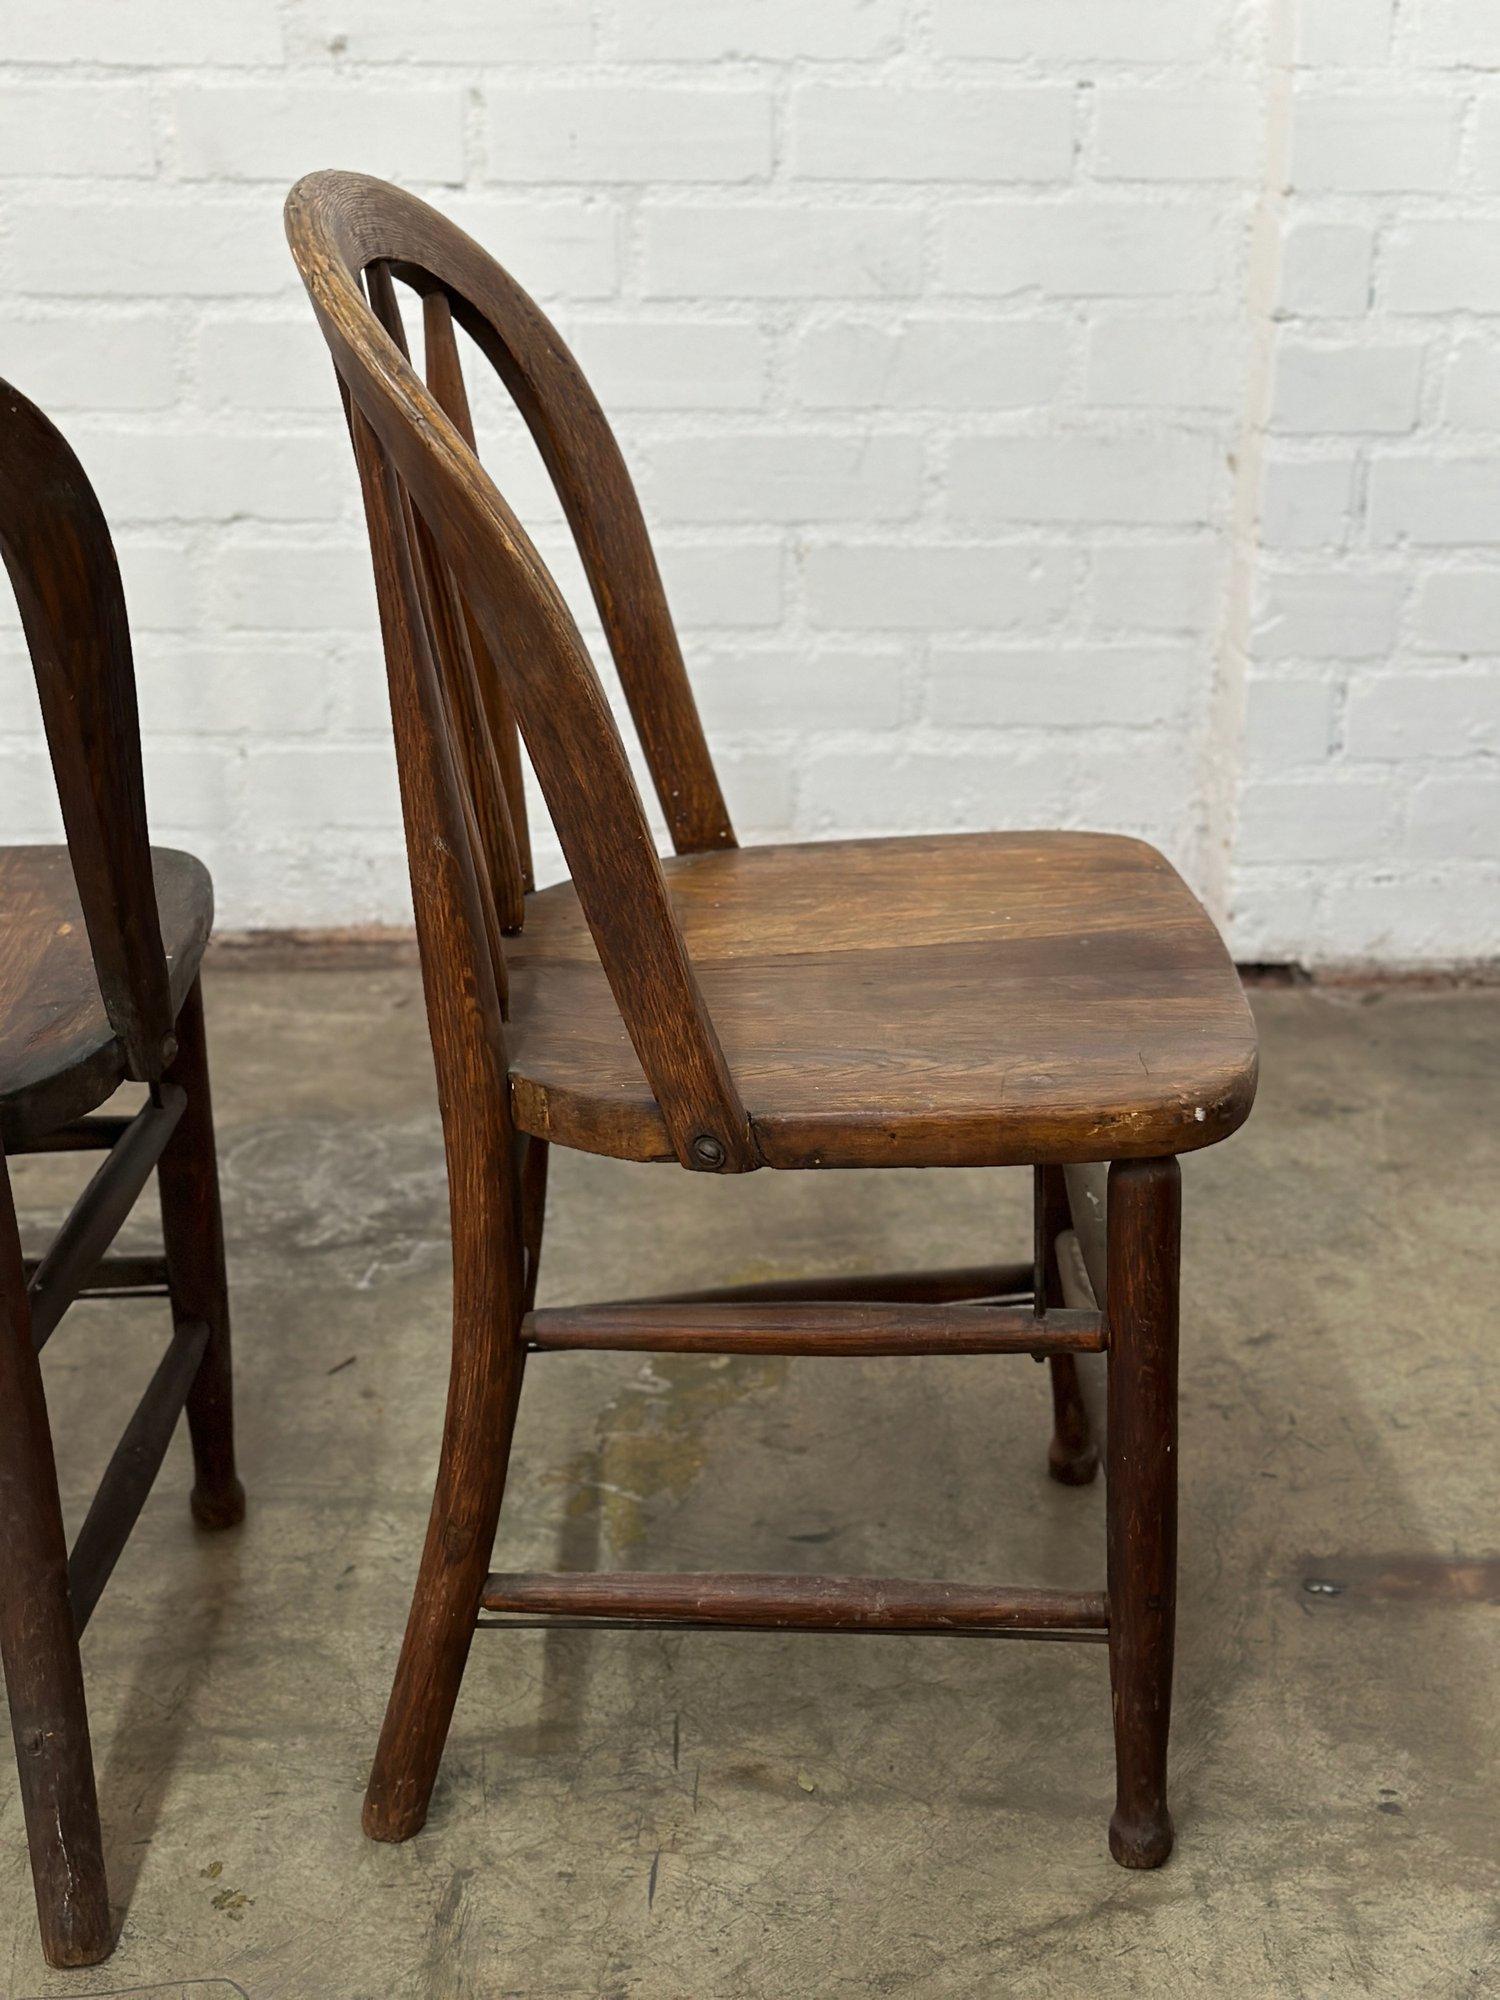 Vintage Farmhouse Spindle Chairs 5